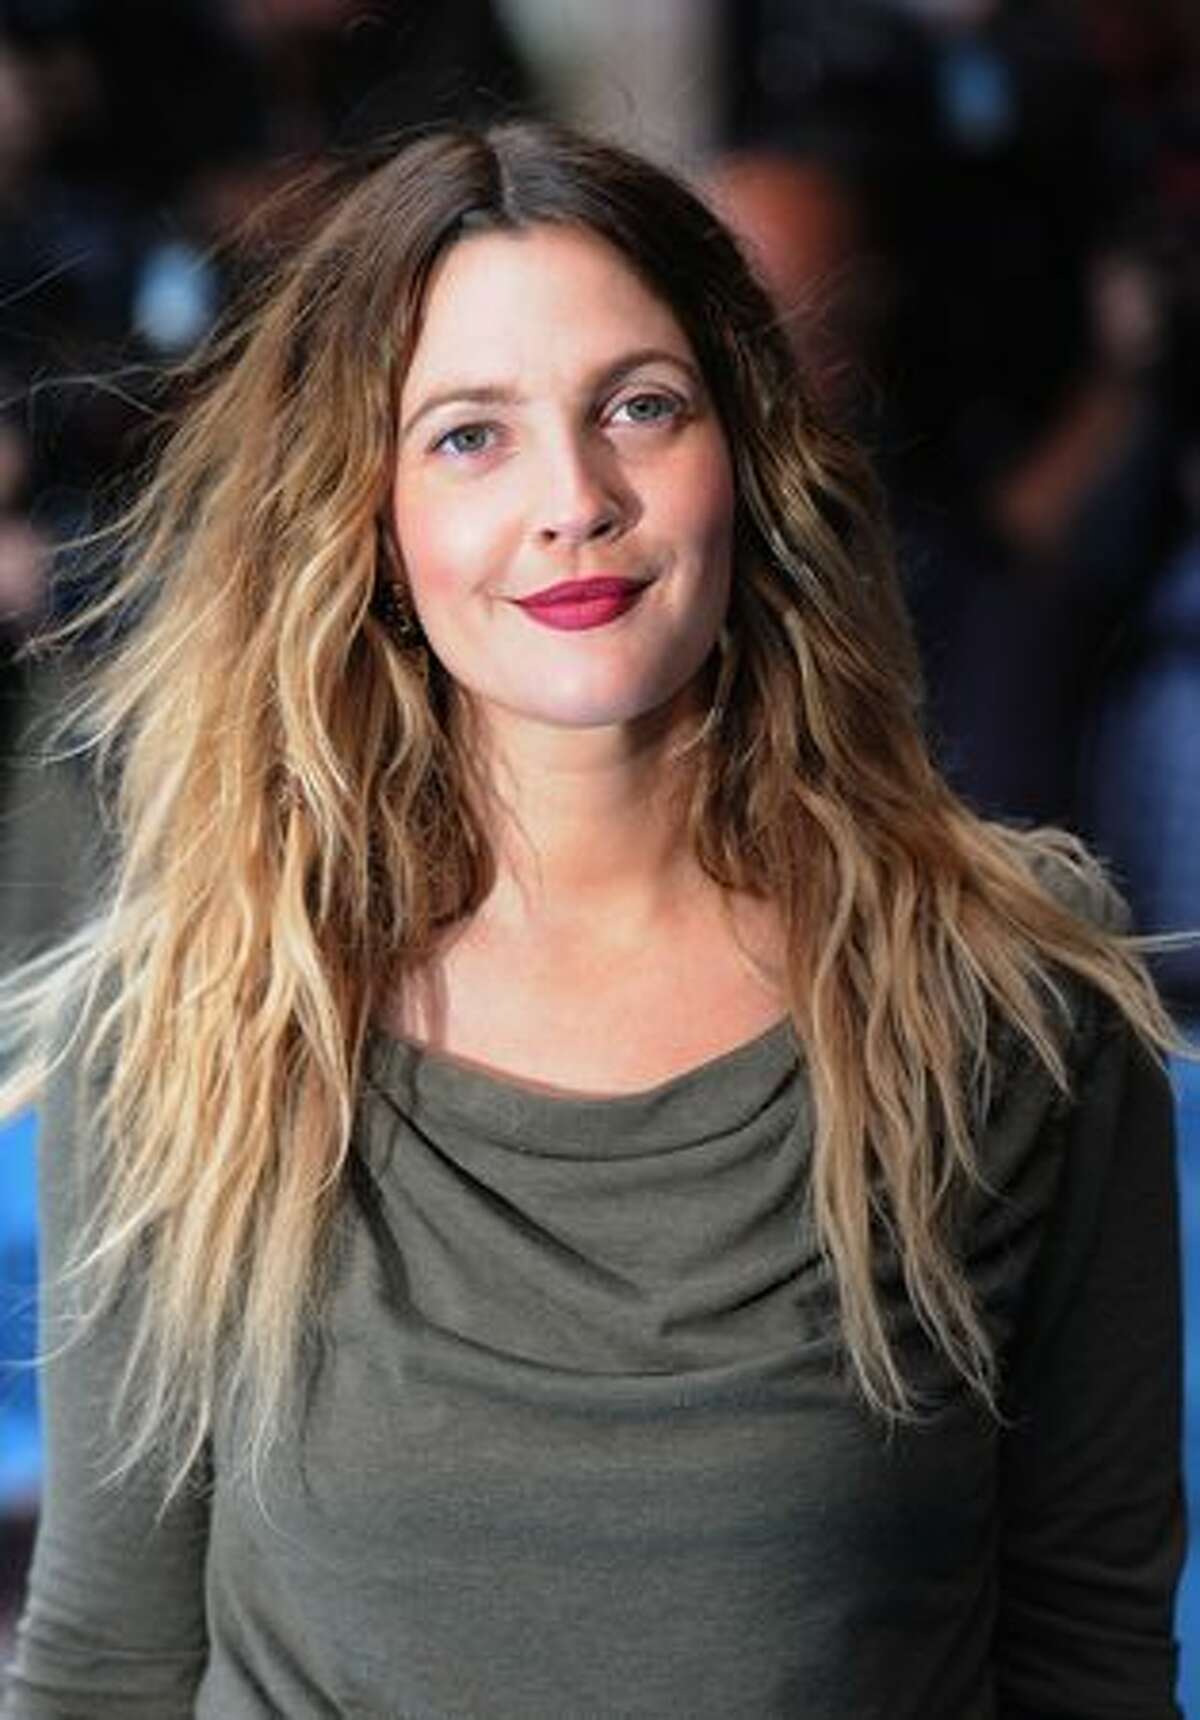 Actress Drew Barrymore attends the world premiere of 'Going The Distance' at the Vue, Leicester Square, in London, England.